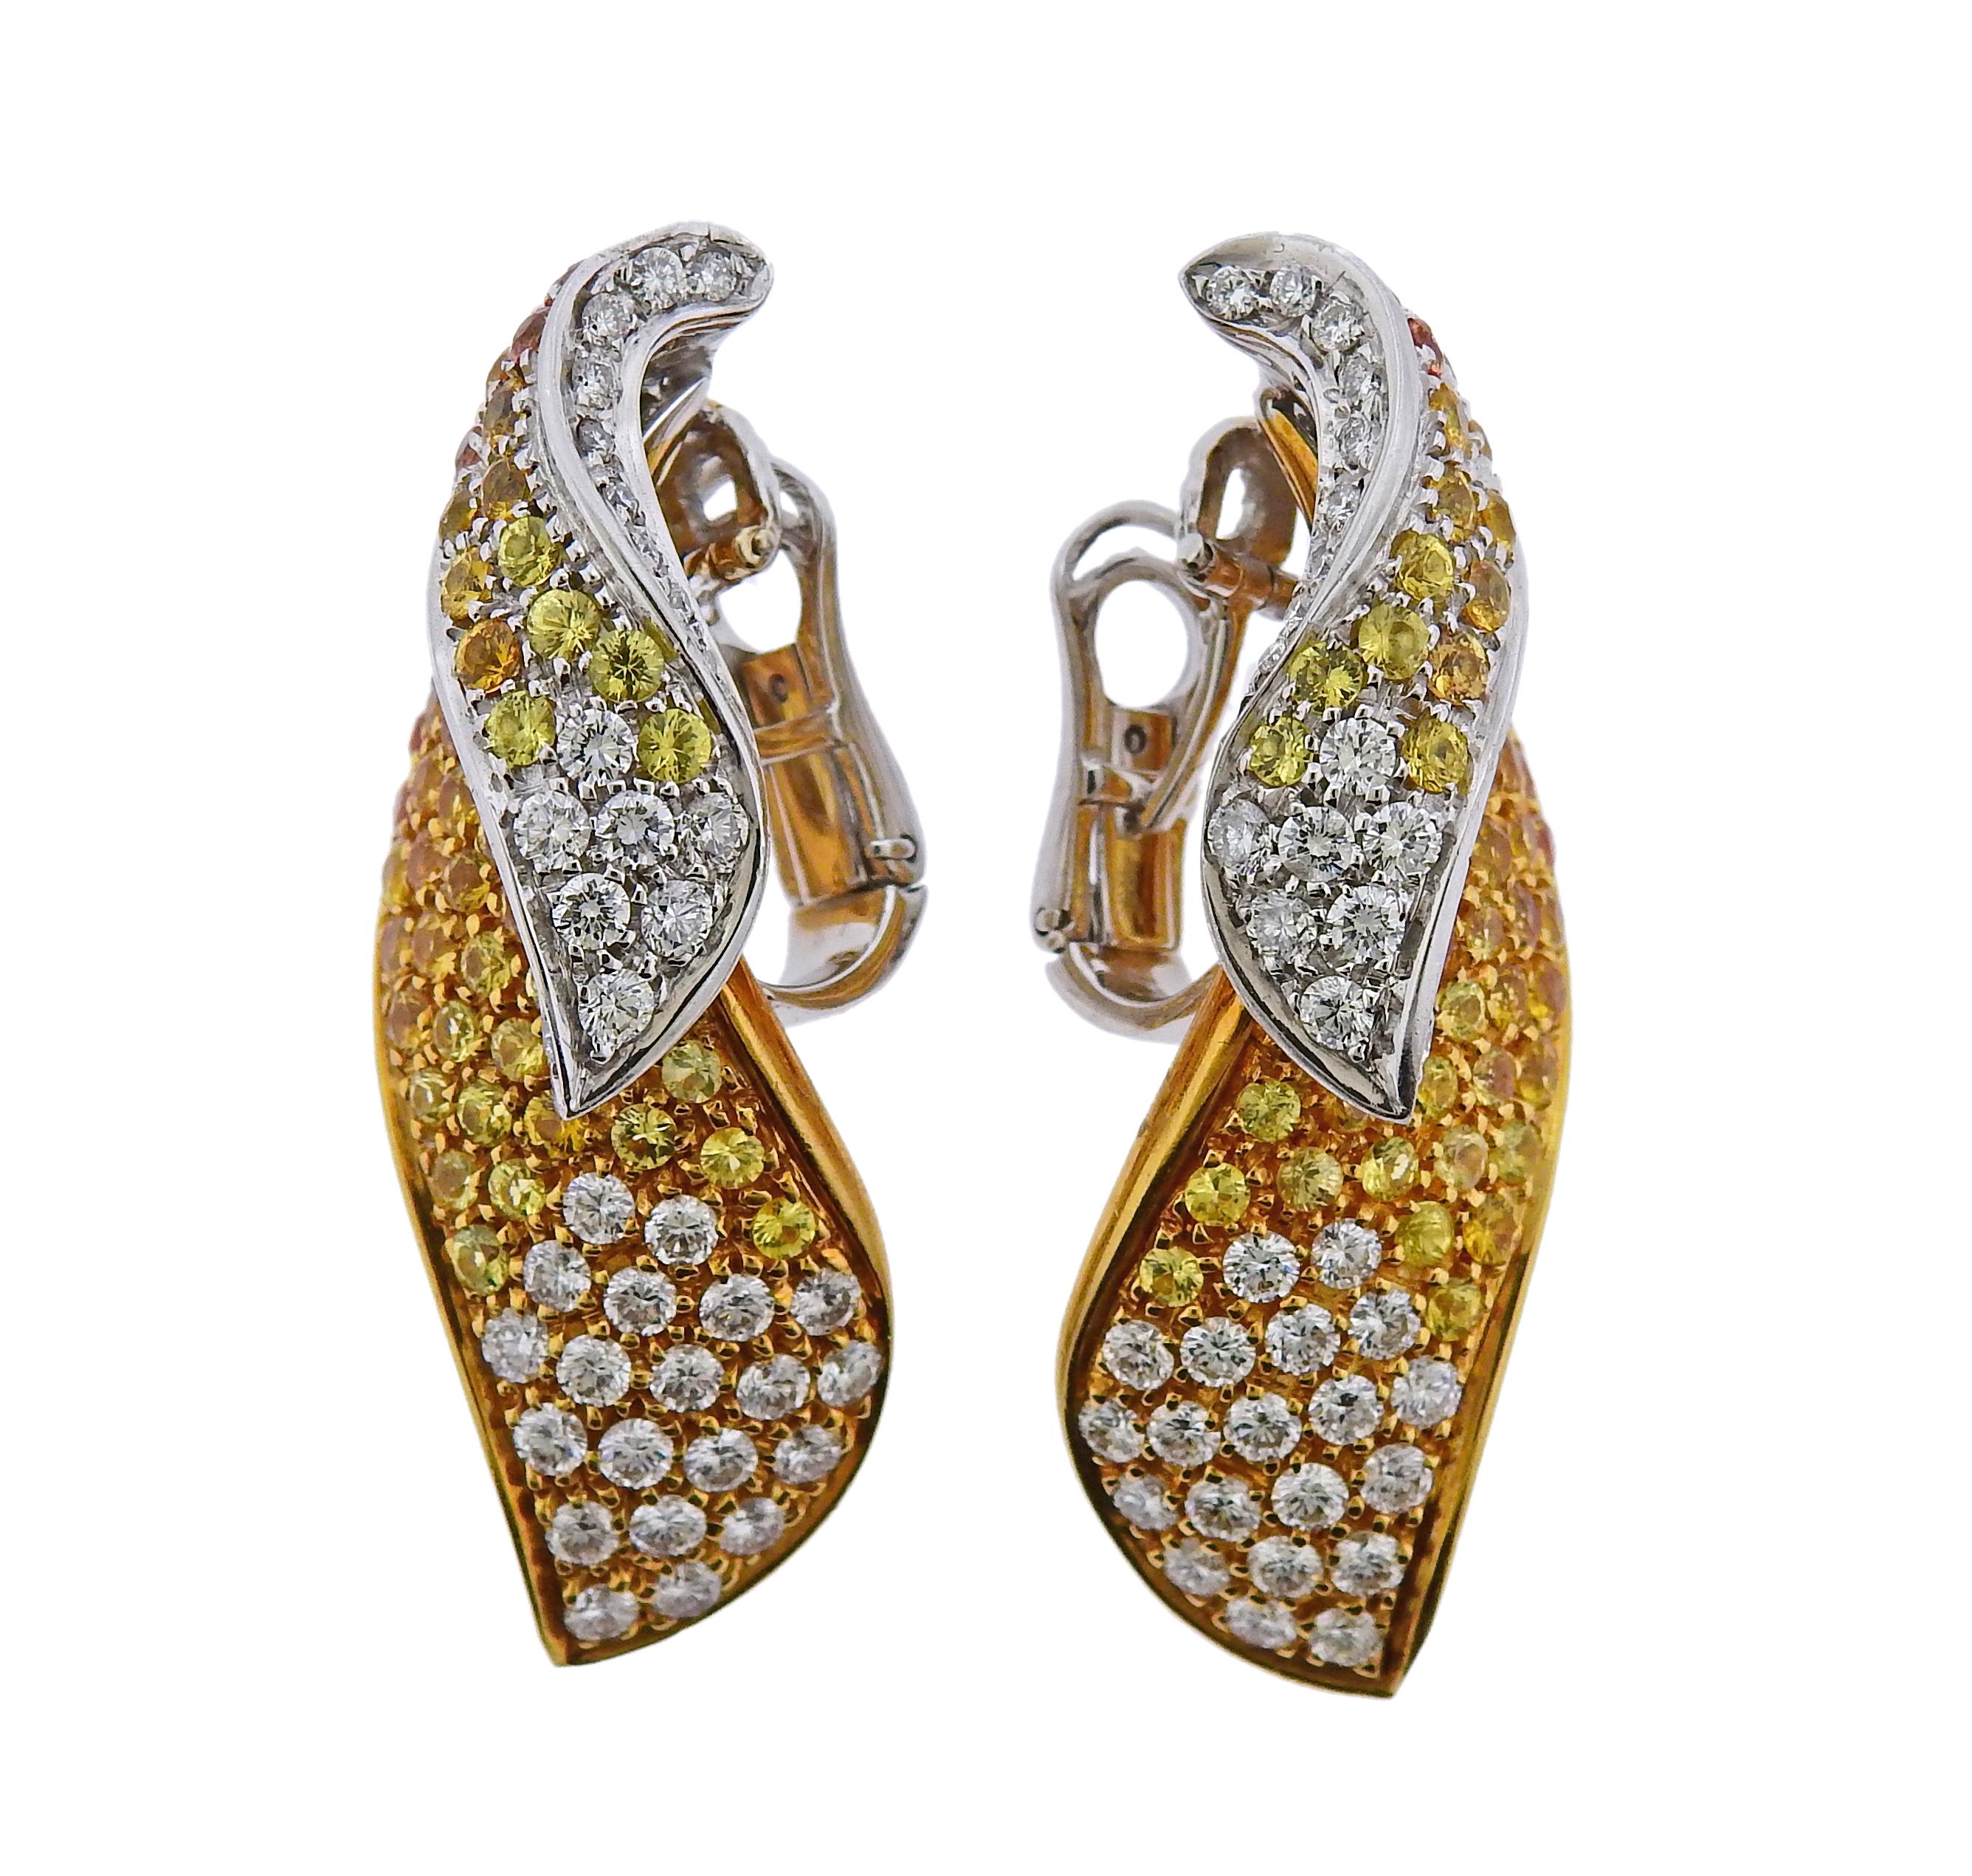 Pair of 18k white and yellow gold earrings, adorned with approx. 5.90ctw in yellow and orange sapphires, and 3.00ctw in G/VS diamonds. Earrings are 41mm x 18mm, with collapsible posts. Weight is 31.5 grams. Marked Dal Lago 750. 